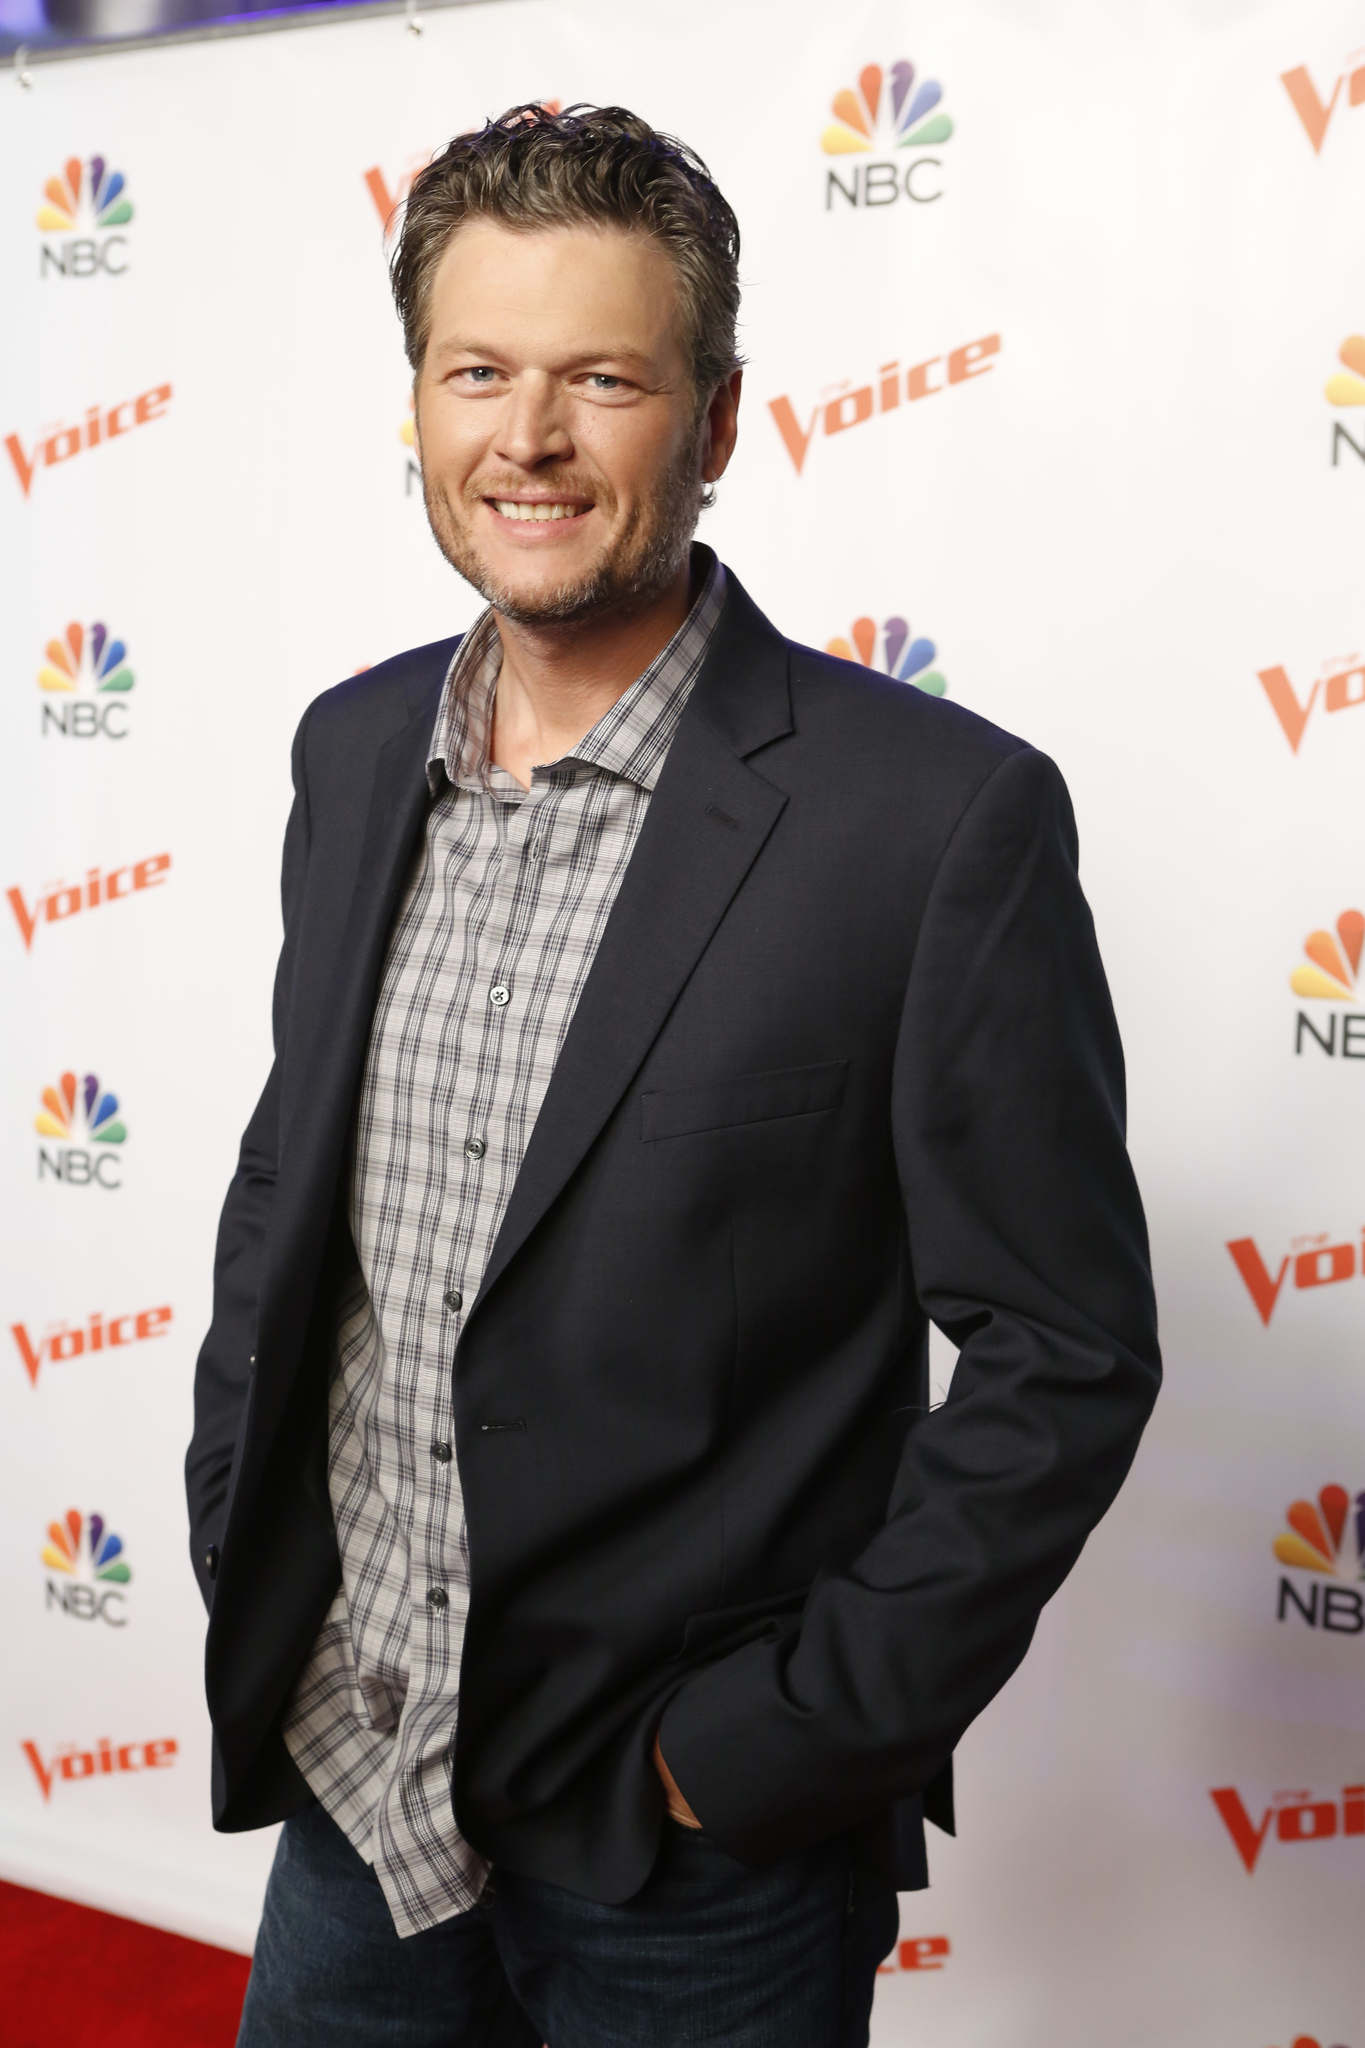 Blake Shelton at event of The Voice (2011)